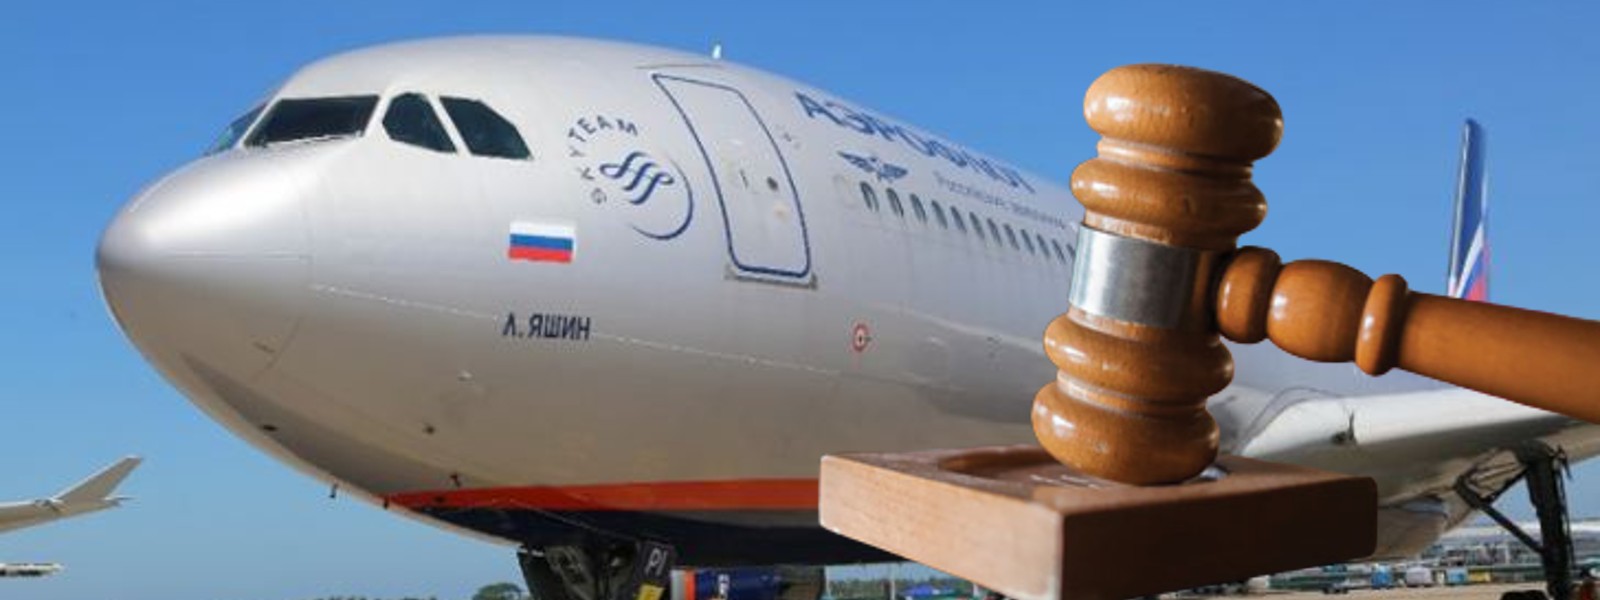 Commercial HC Fiscal Officer suspended over conduct in enforcing order on Aeroflot Case